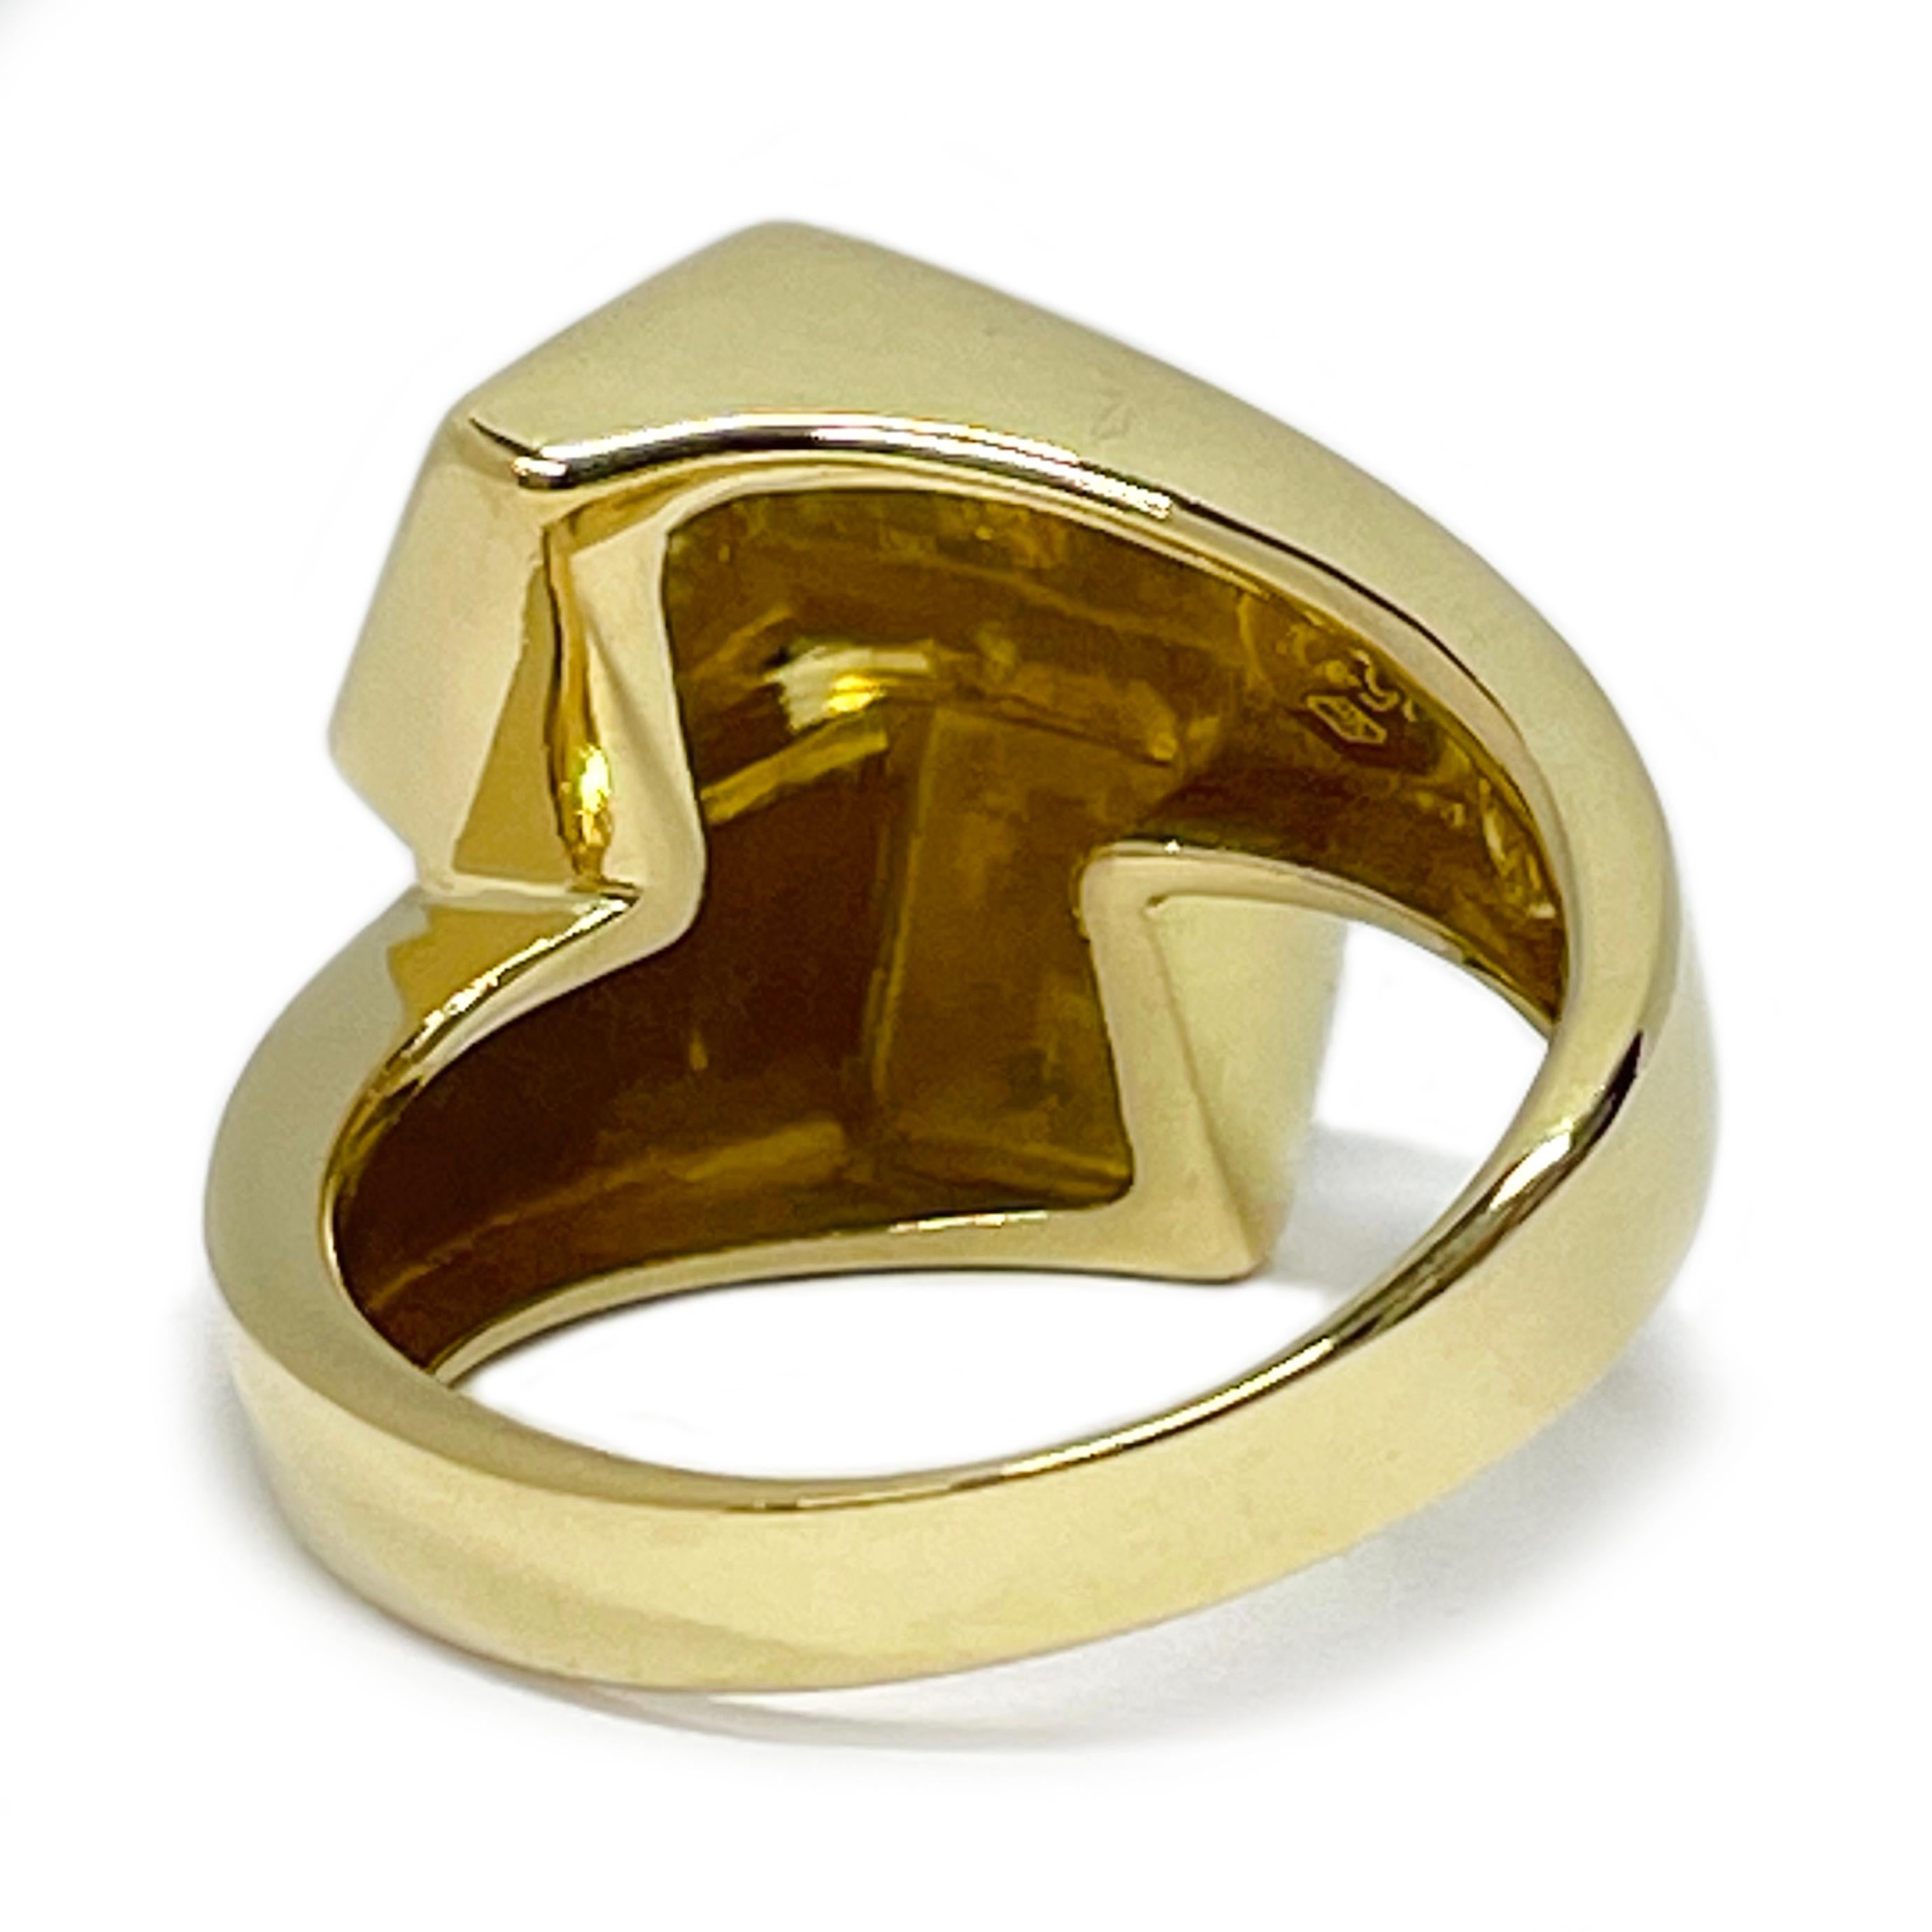 Le-Gi Yellow Gold Bypass Ring In Good Condition For Sale In Palm Desert, CA